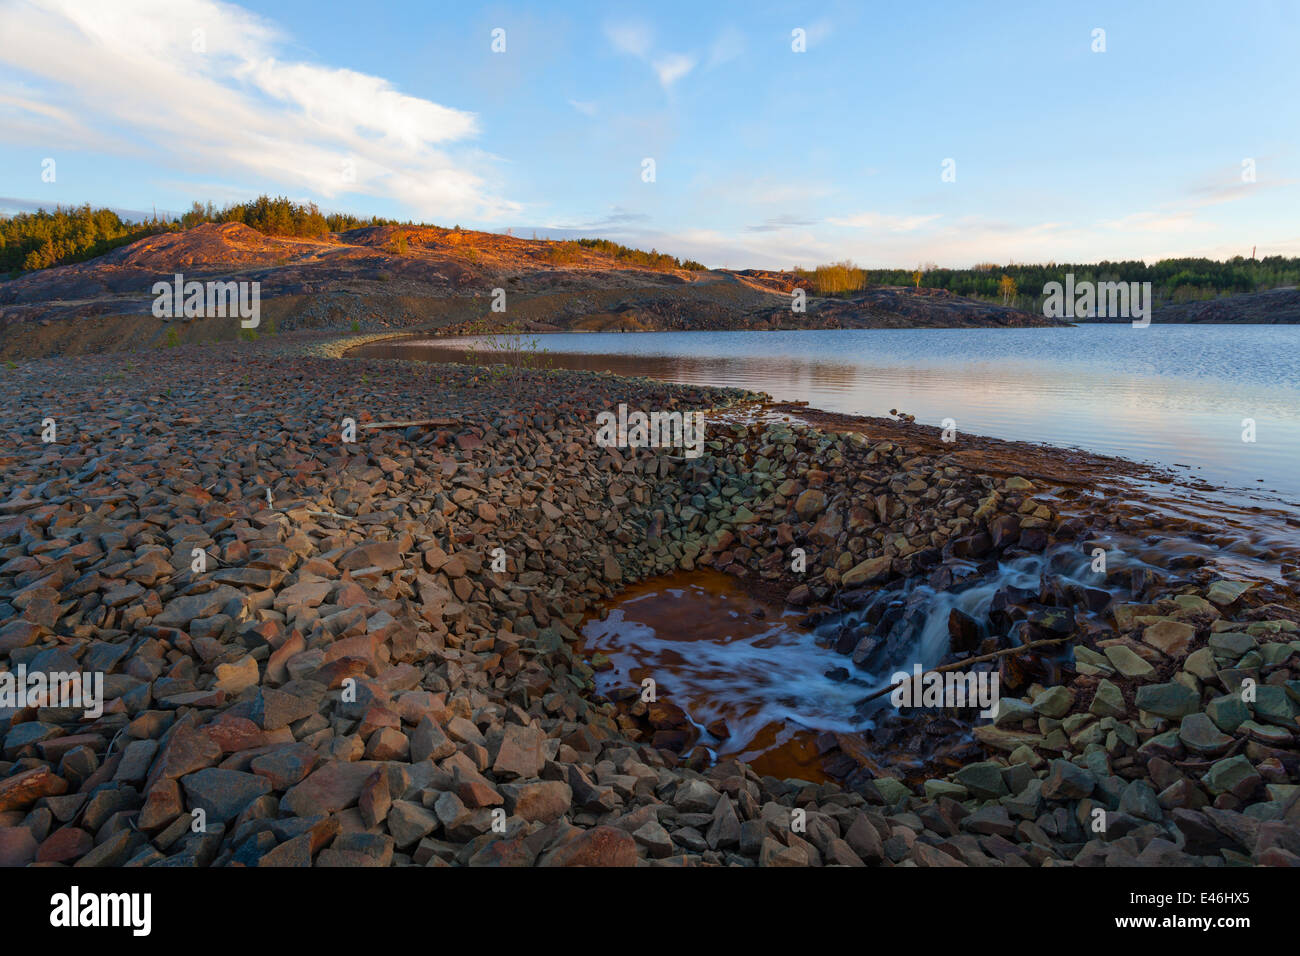 Strong rusty, red and brown colours cover the rocky dam that contains the tailings pond in Sudbury near the Vale Mine. Stock Photo